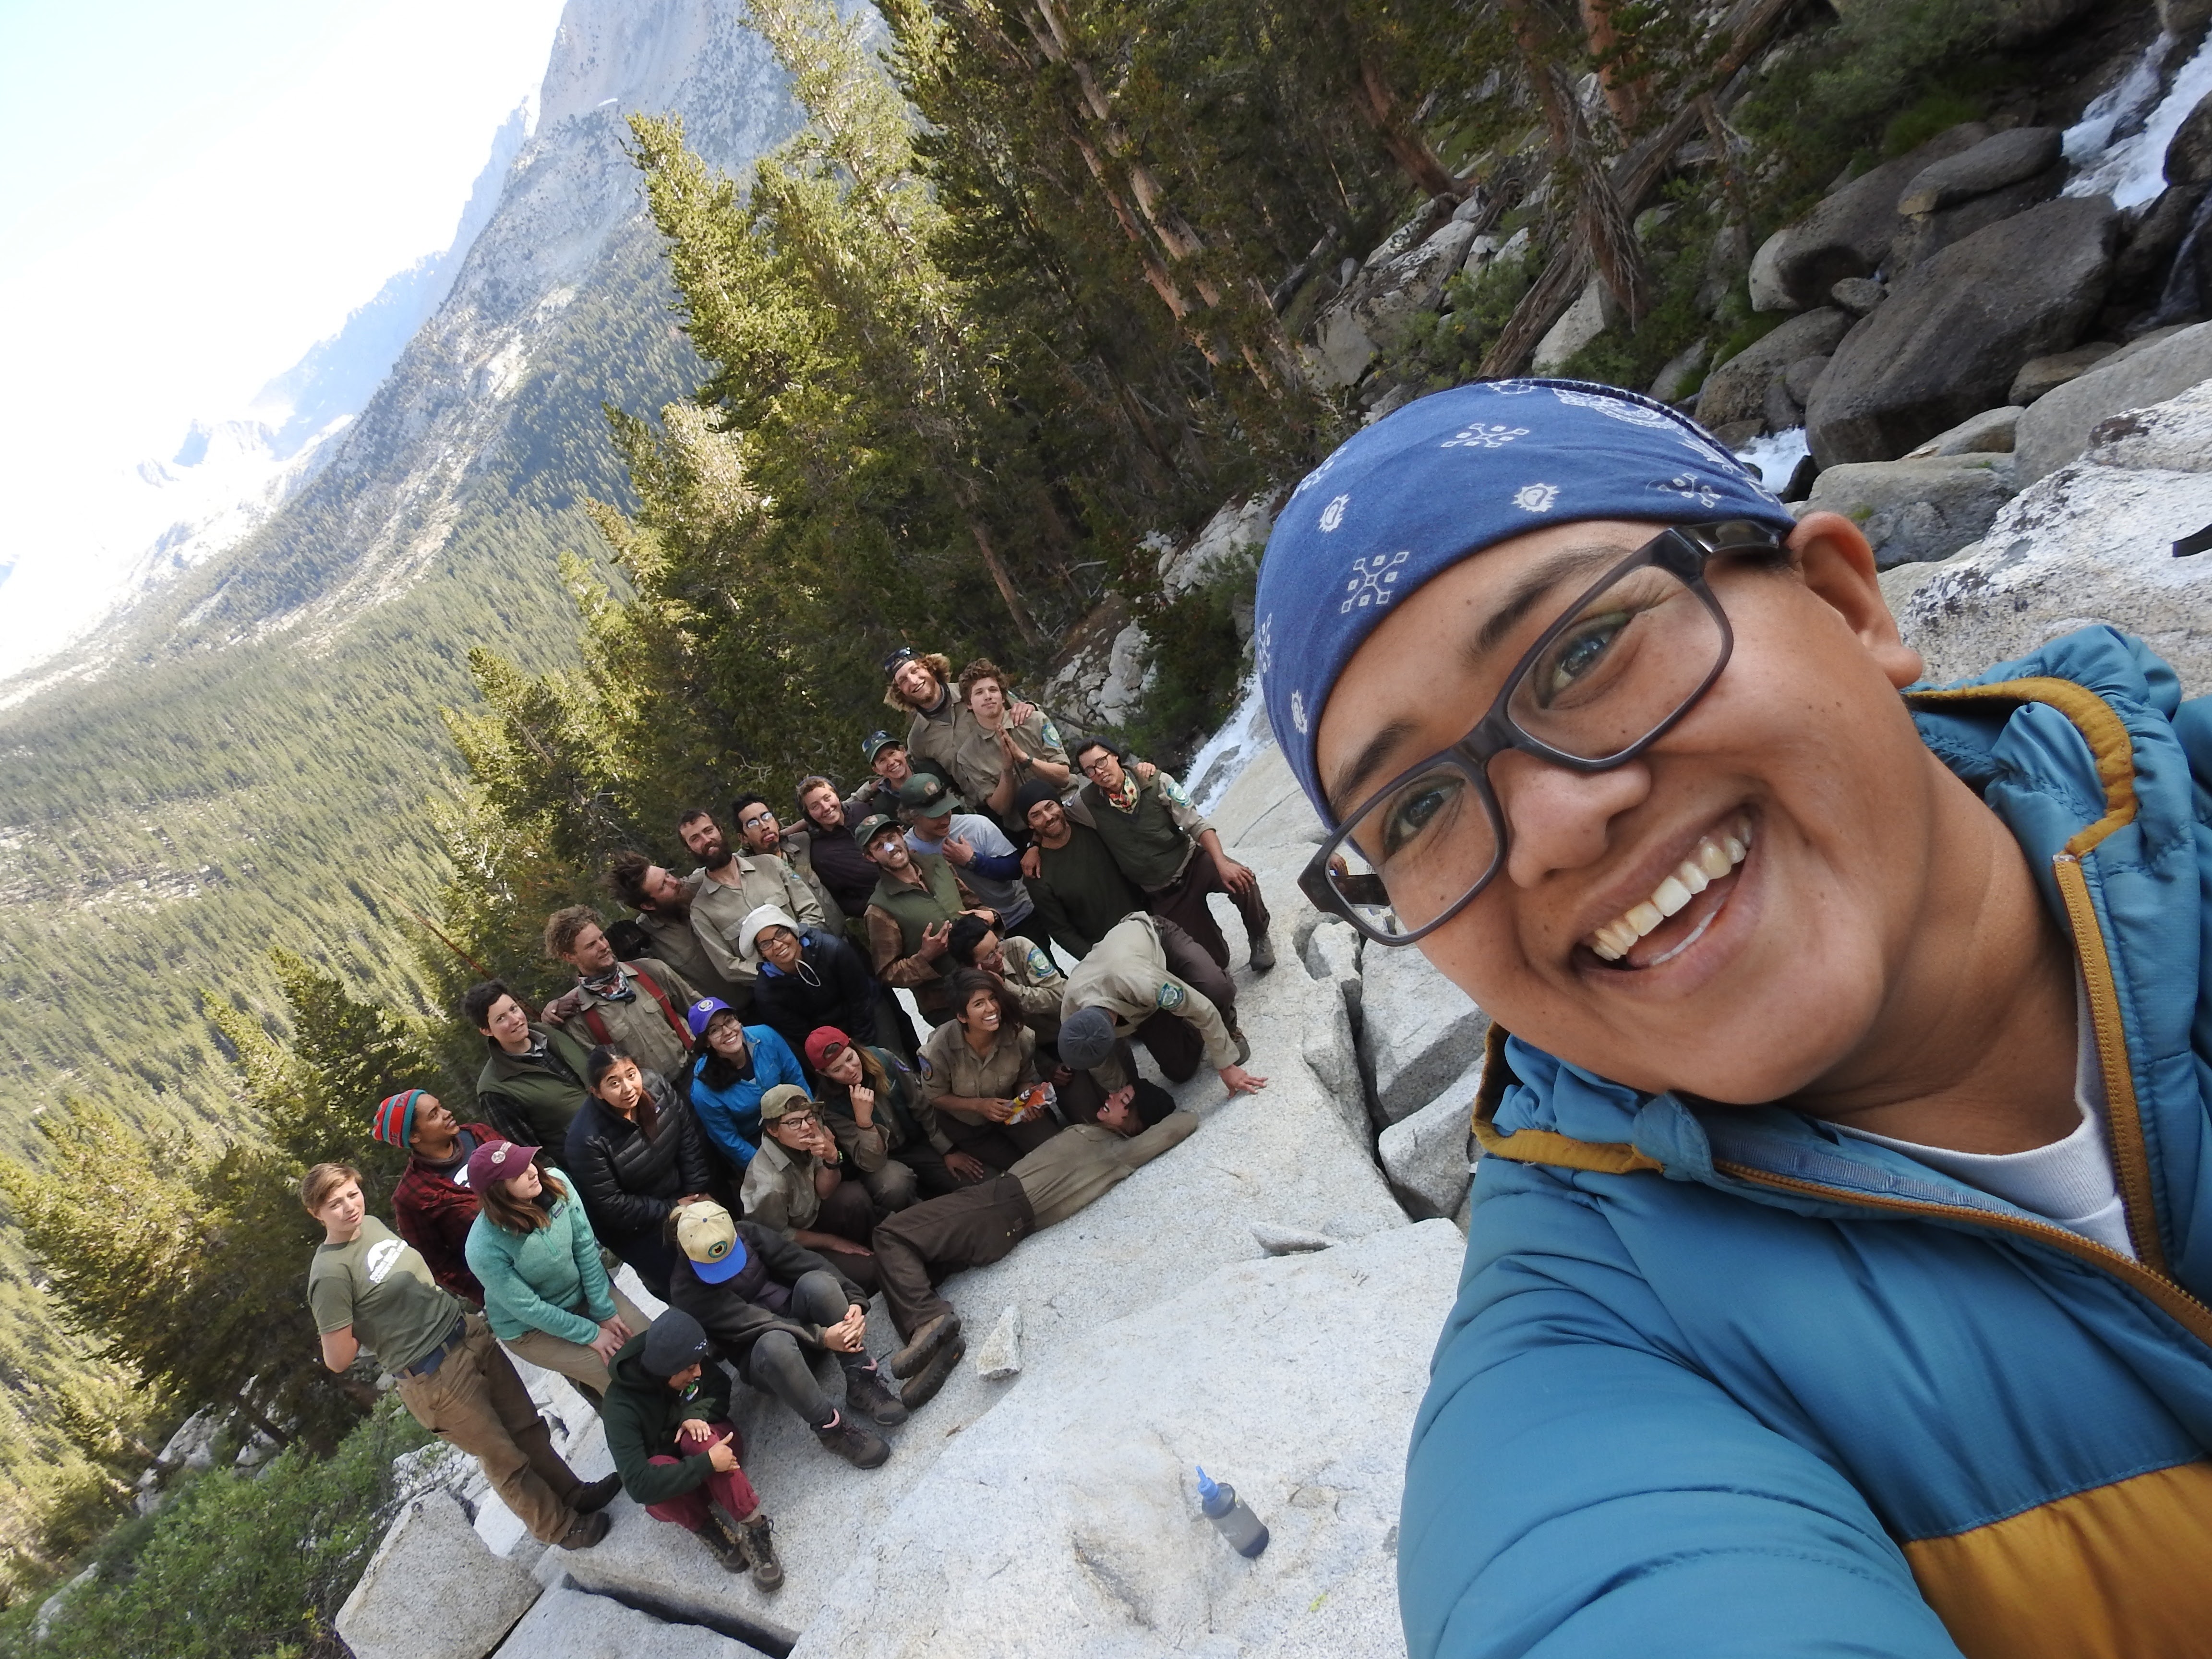 A person takes a selfie with a large group smiling in the background